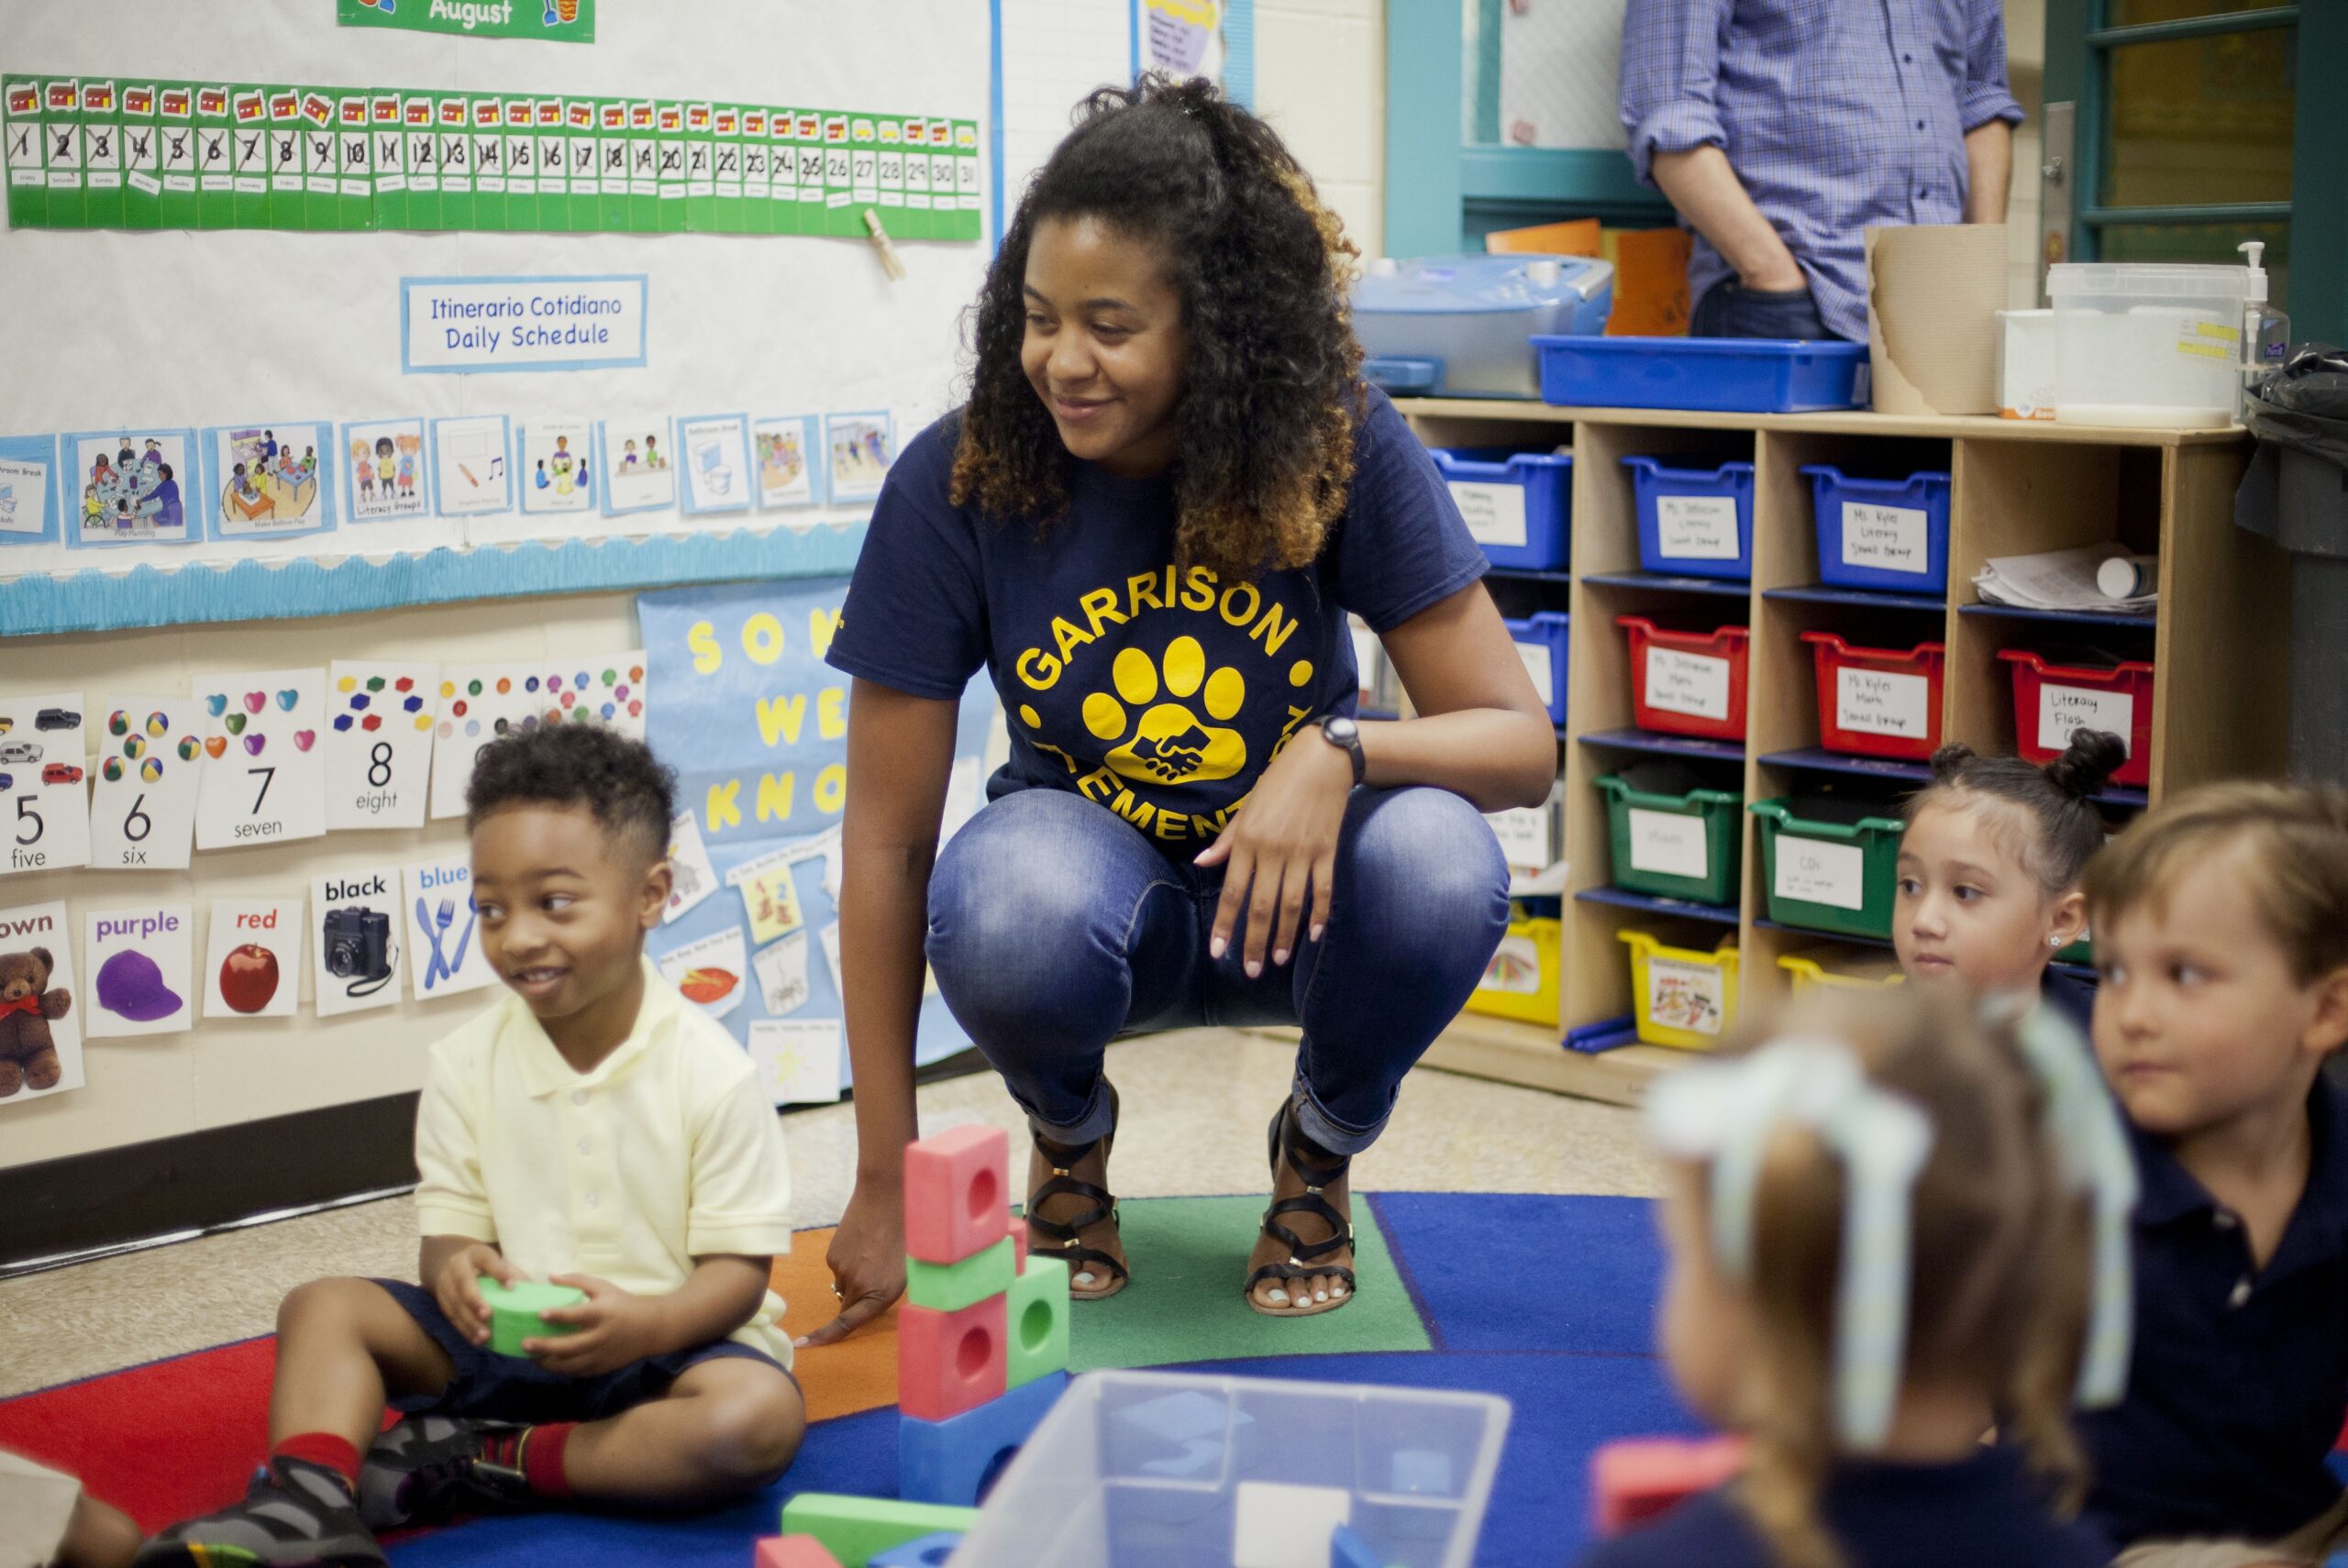 Epernay Kyles, center, Pre-K teacher at Garrison Elementary in the Logan Circle neighborhood in Washington, meets with her students on the first day of classes